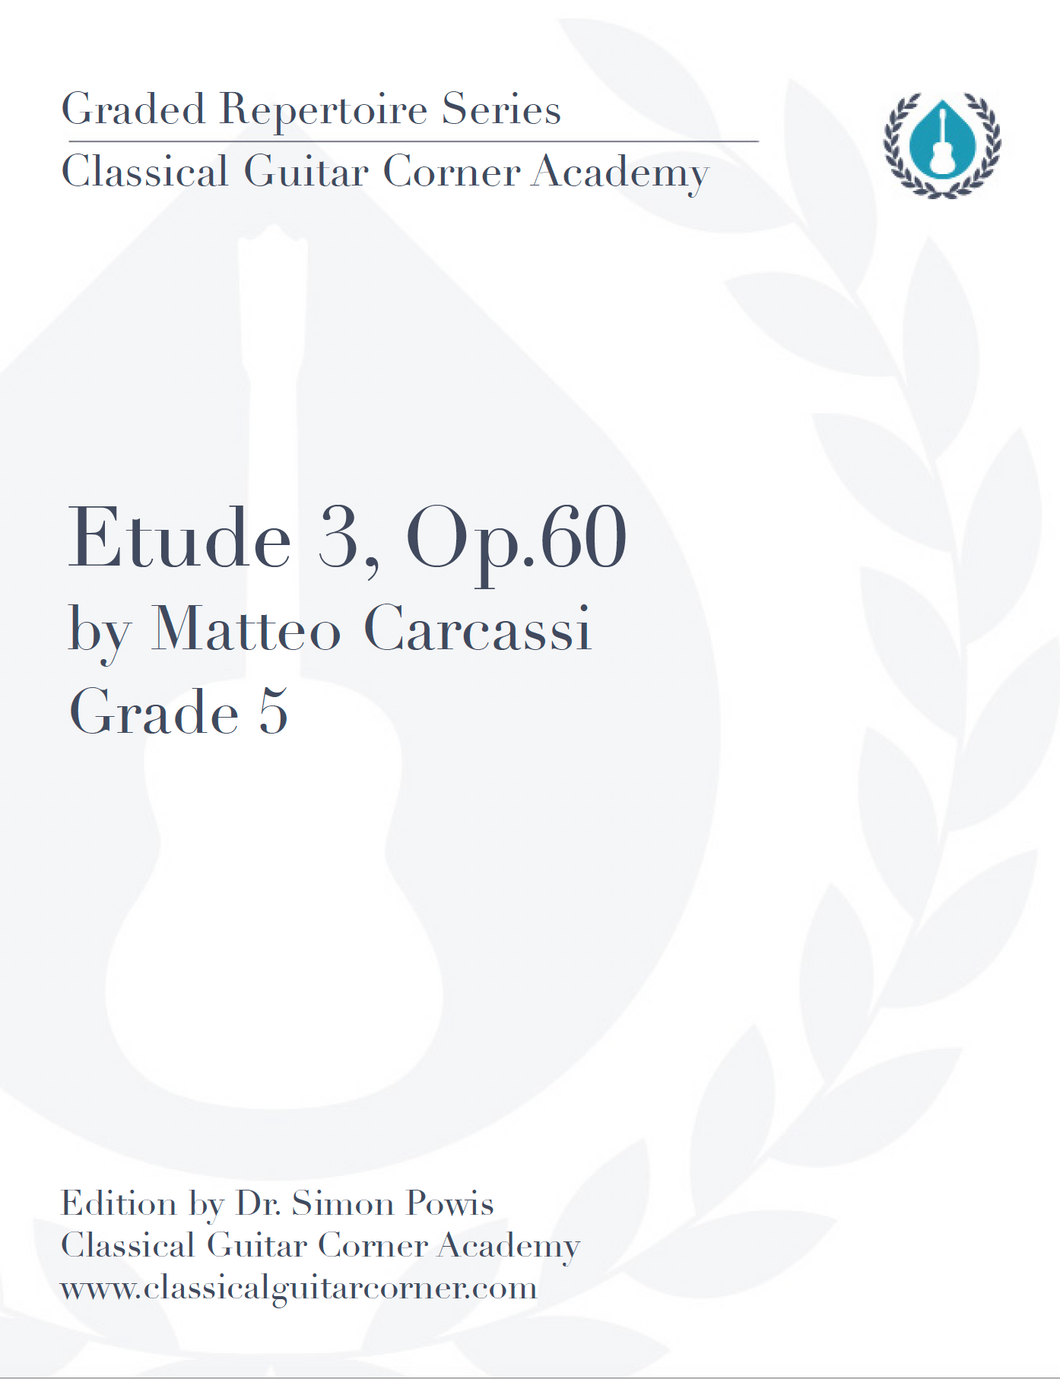 Etude 3, Op.60 by Matteo Carcassi TAB